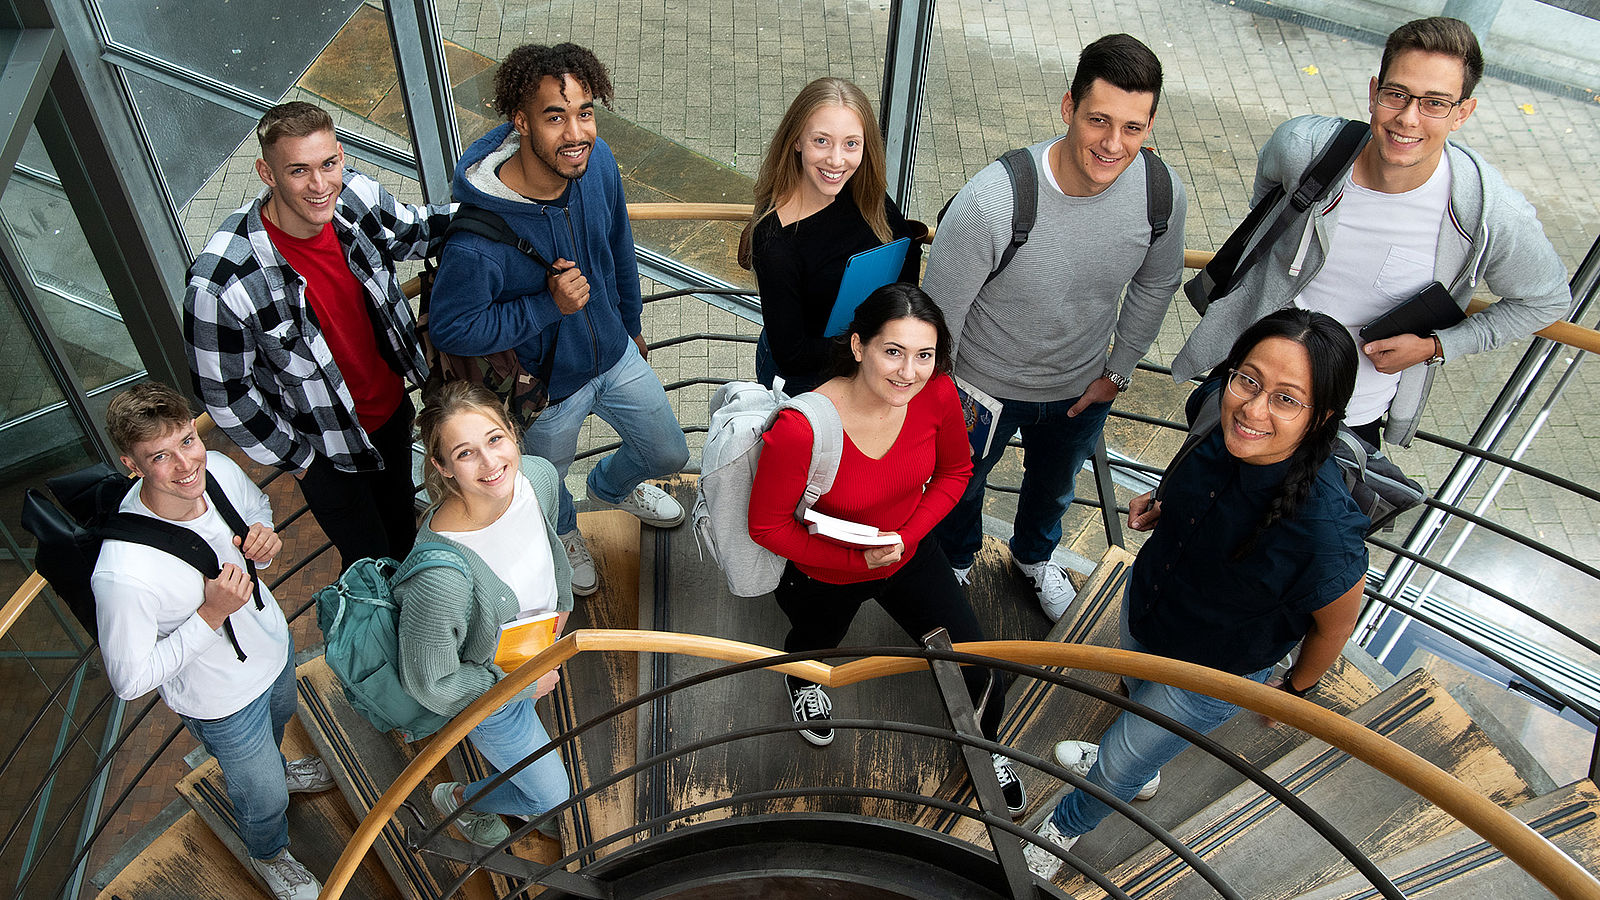 Students at Esslingen University of Applied Sciences standing on the stairs looking upwards.